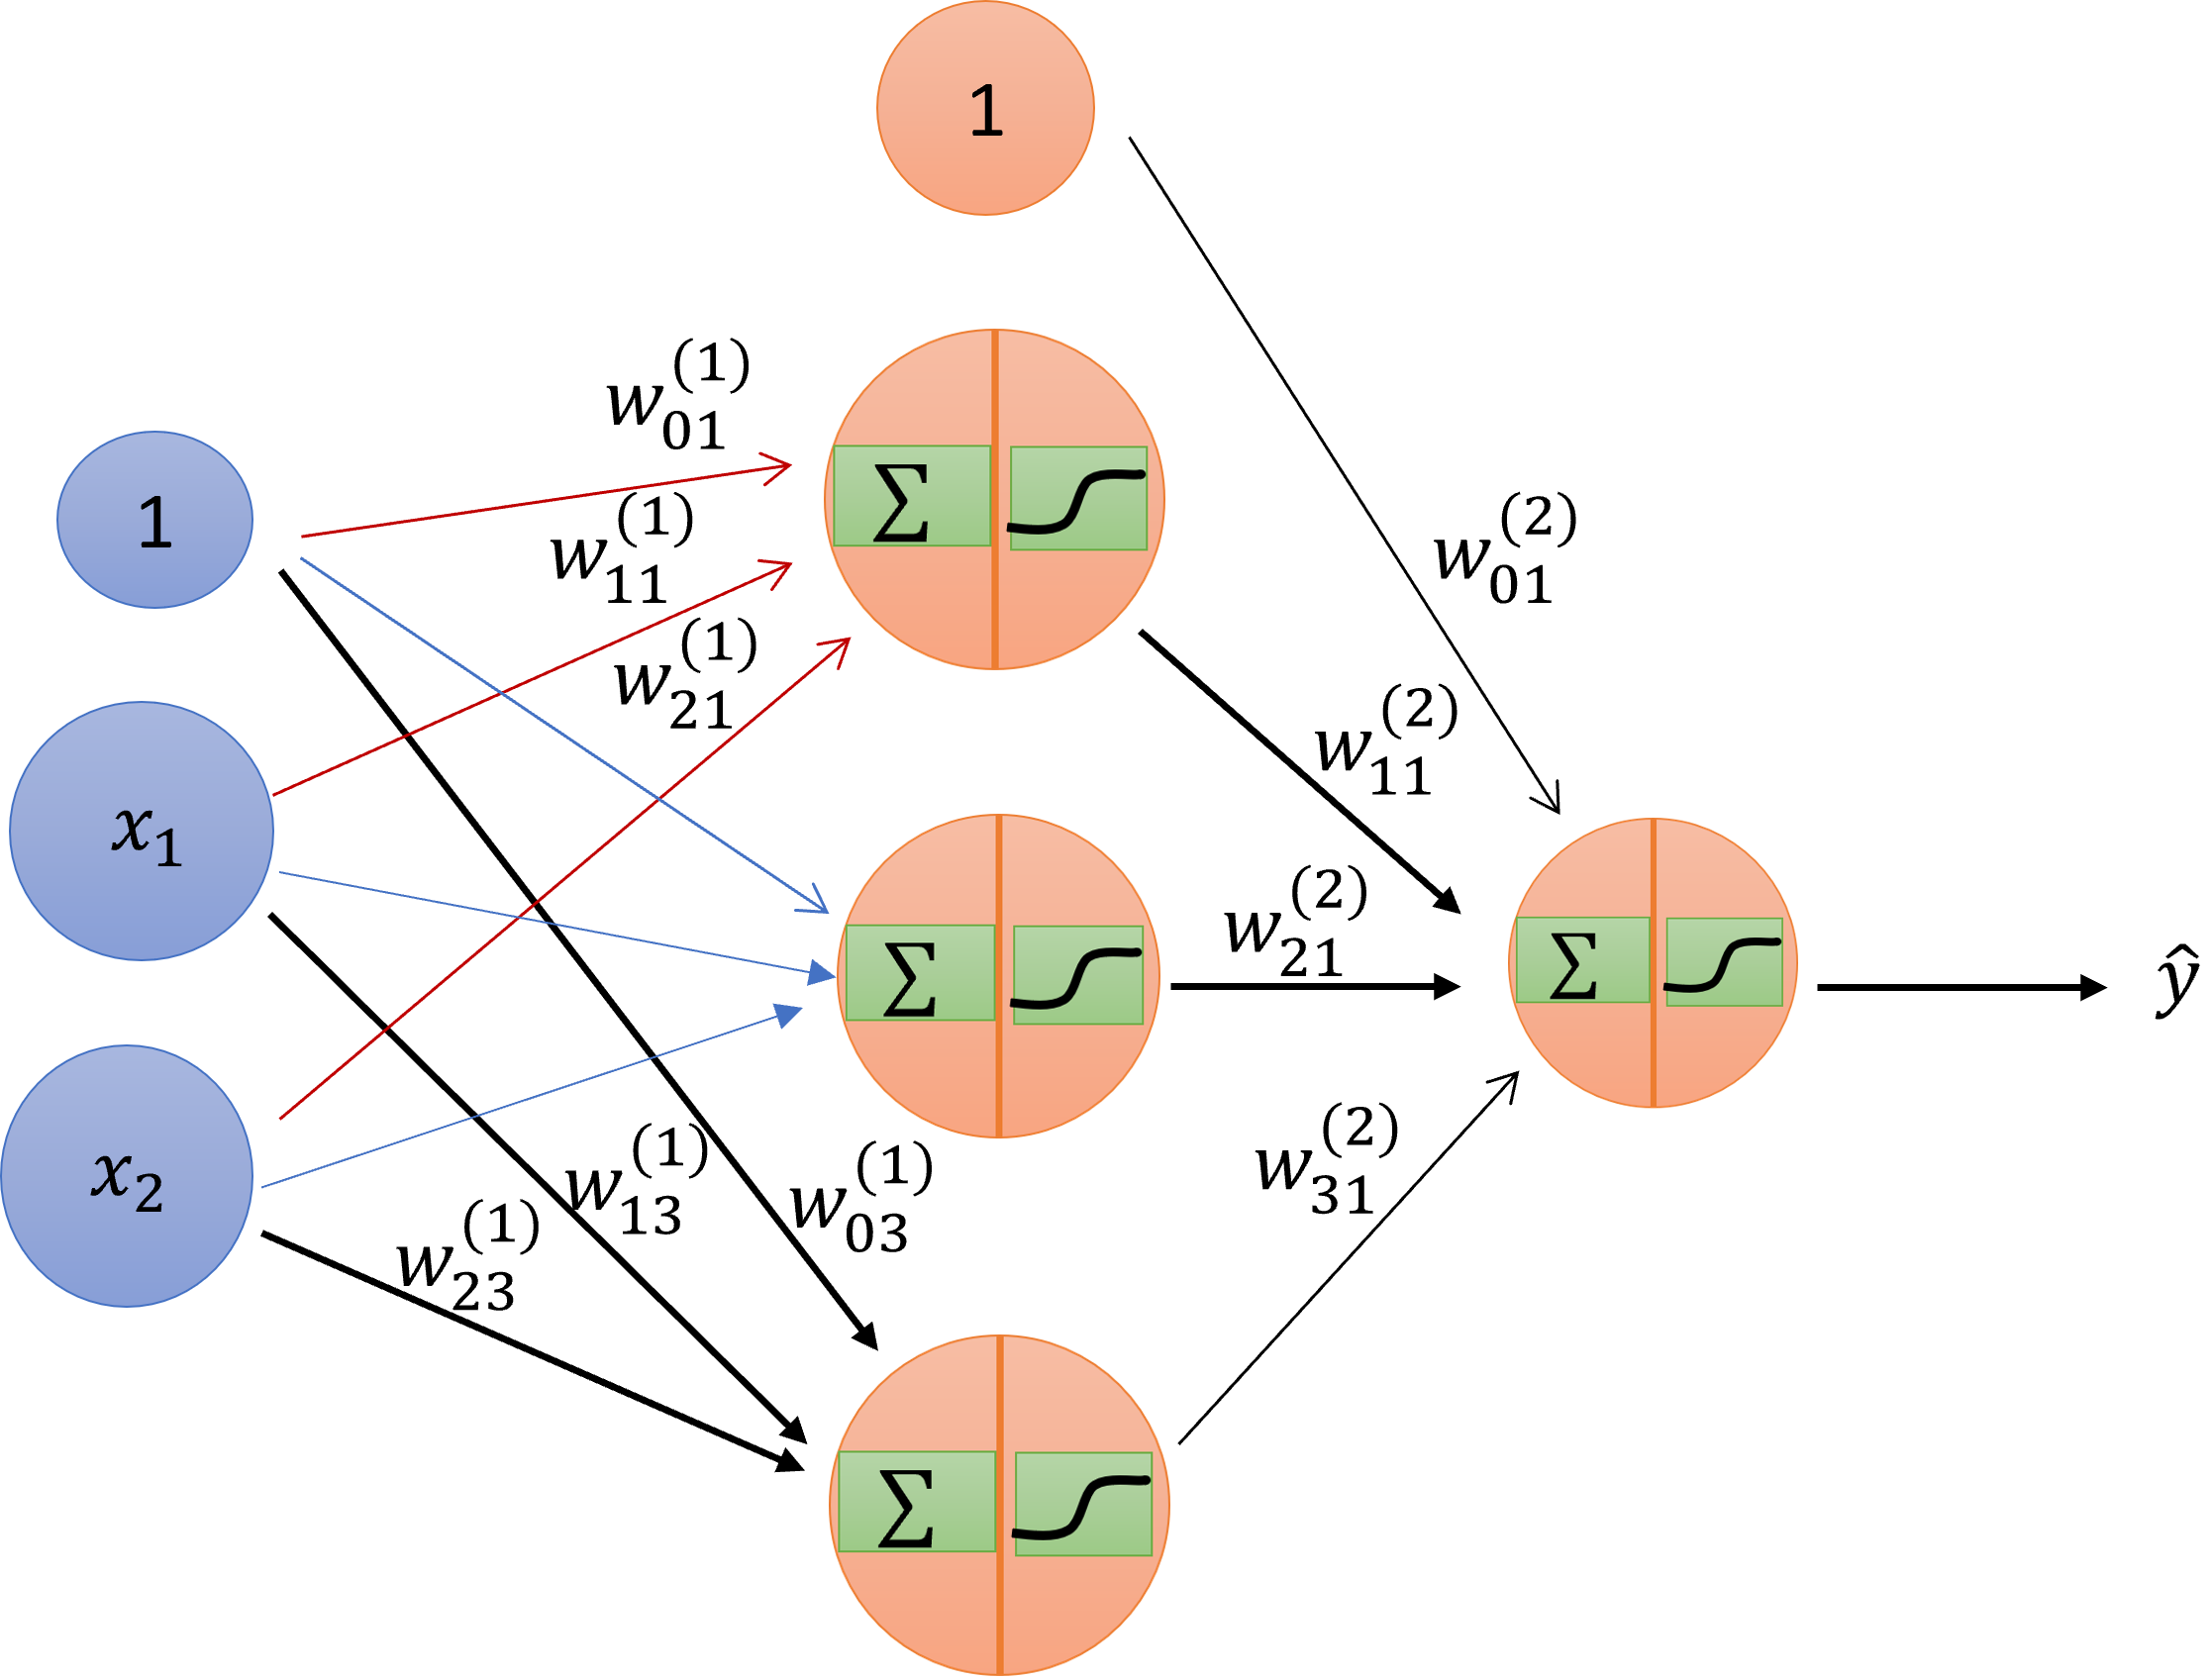 Schematic drawing of an artificial neural network.